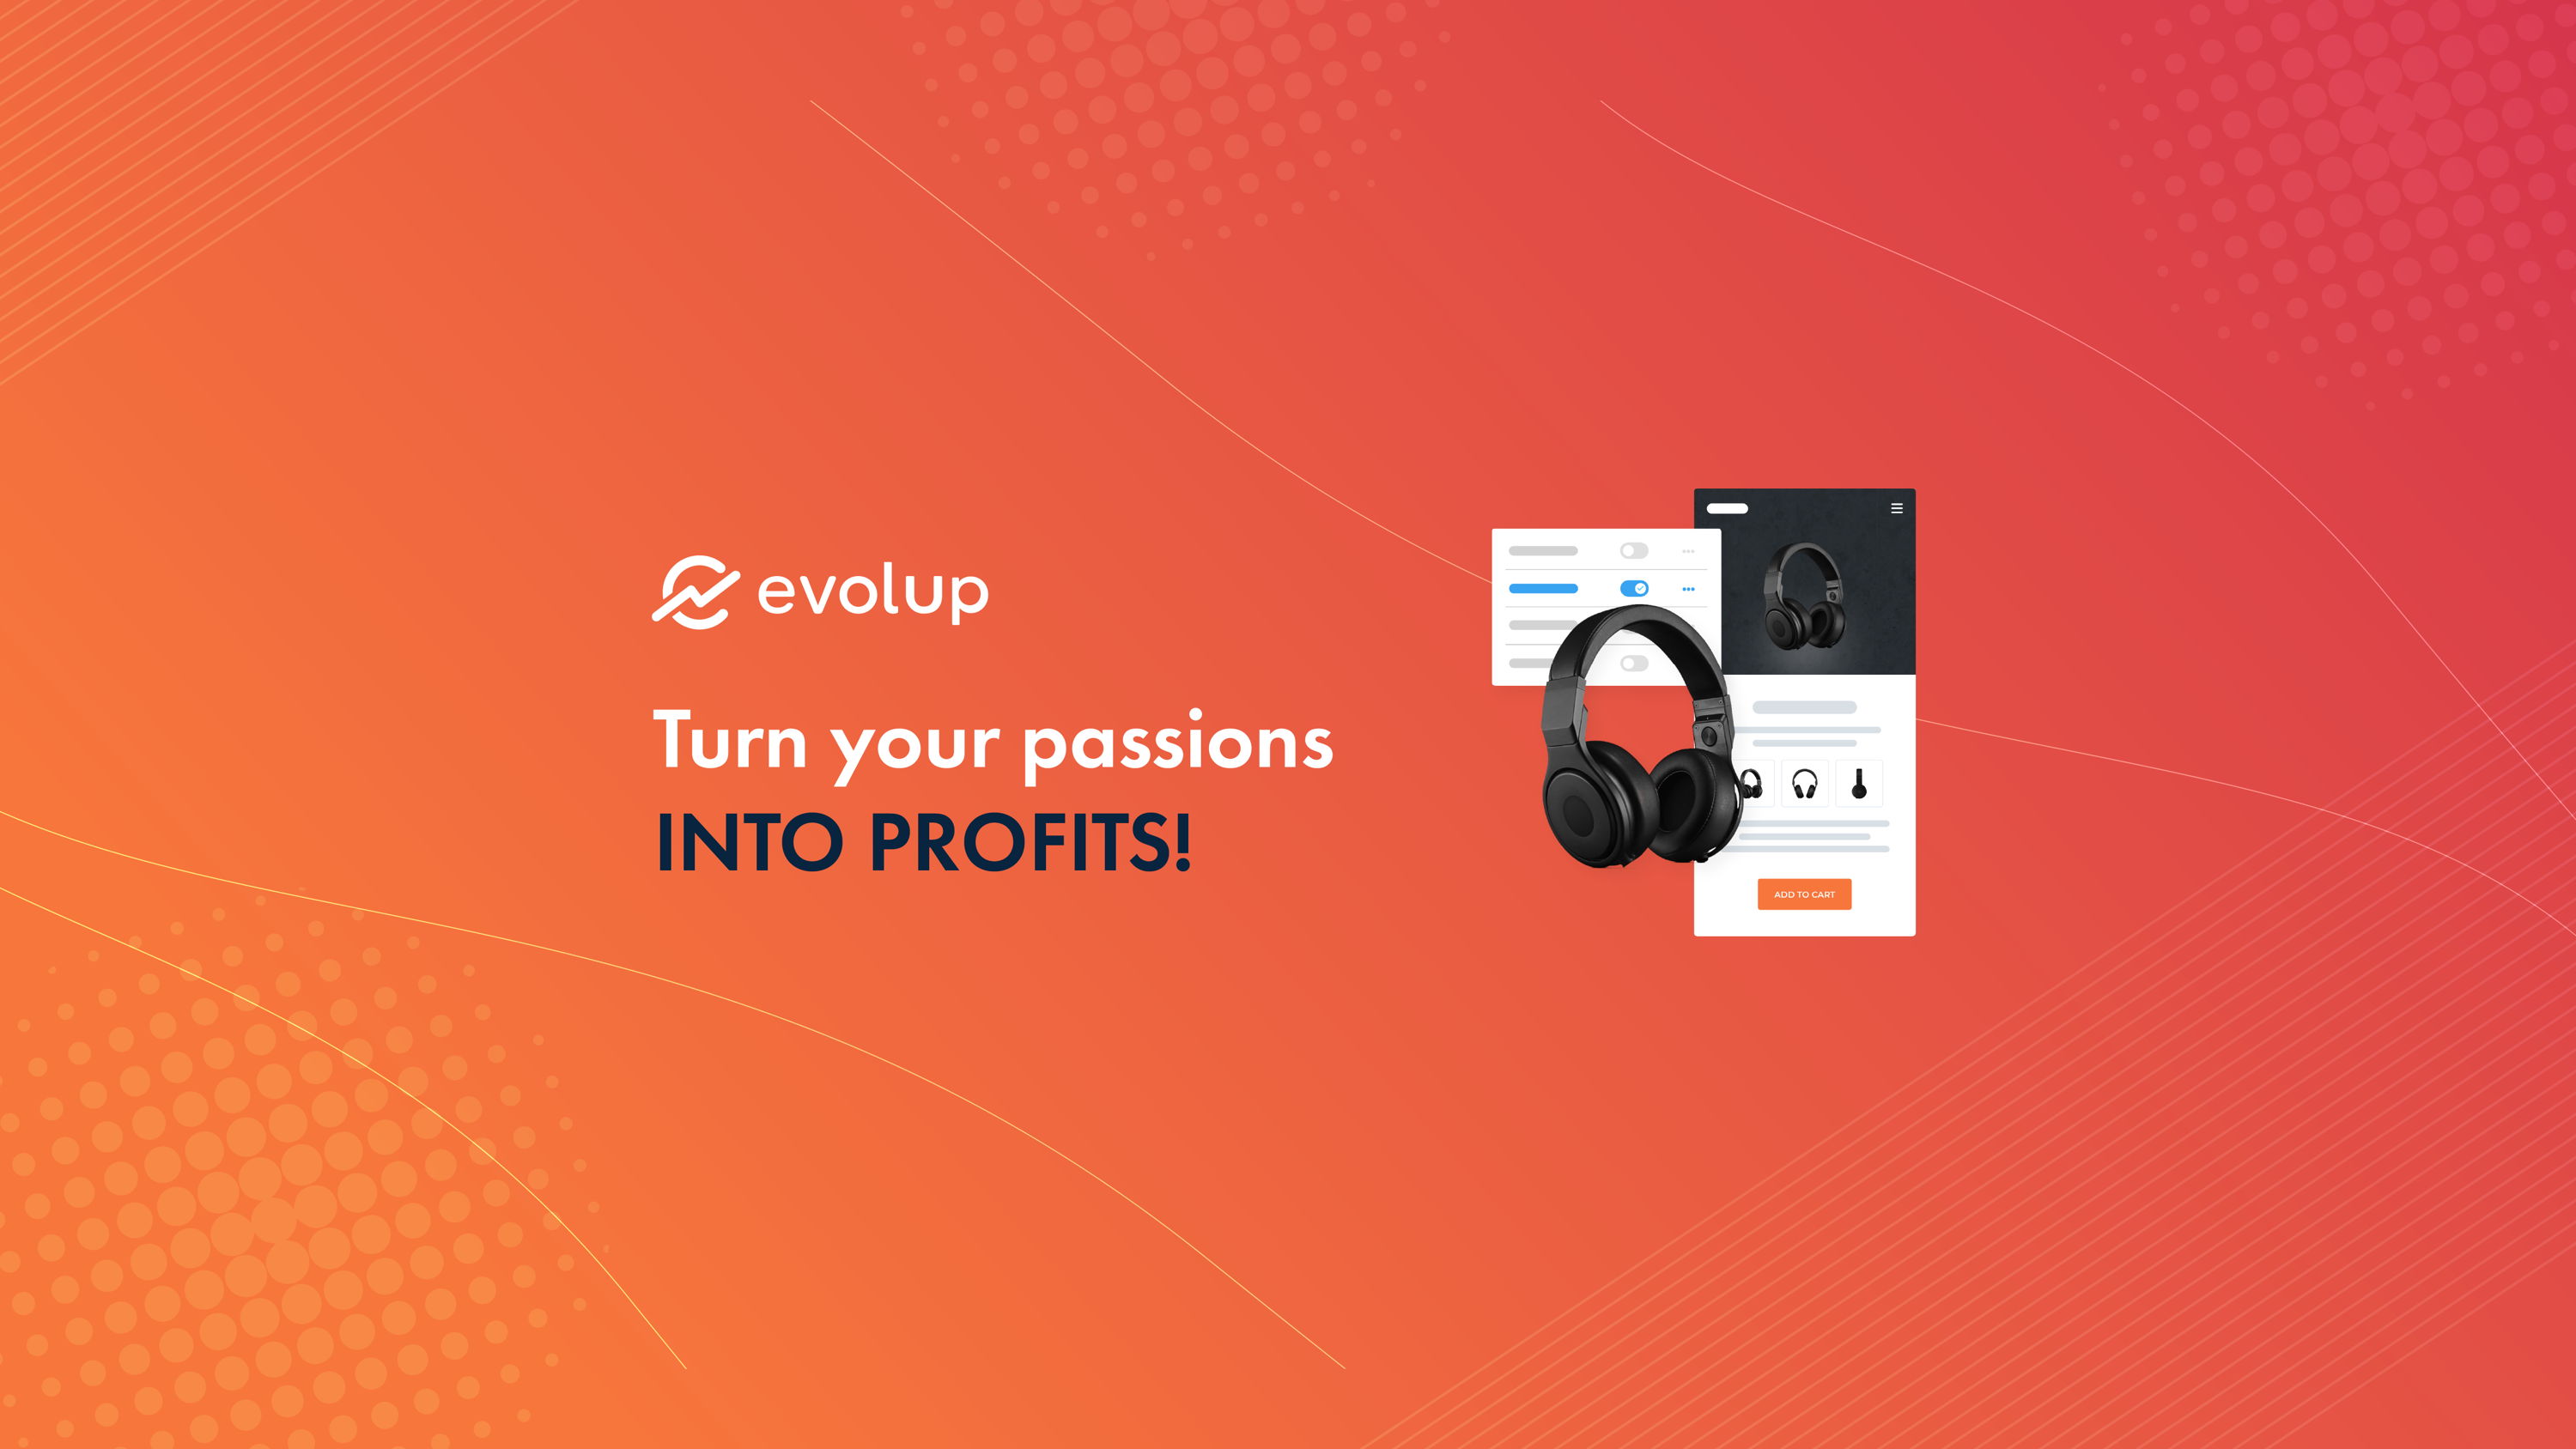 WiziShop launches Evolup, a new service making ecommerce accessible to everyone